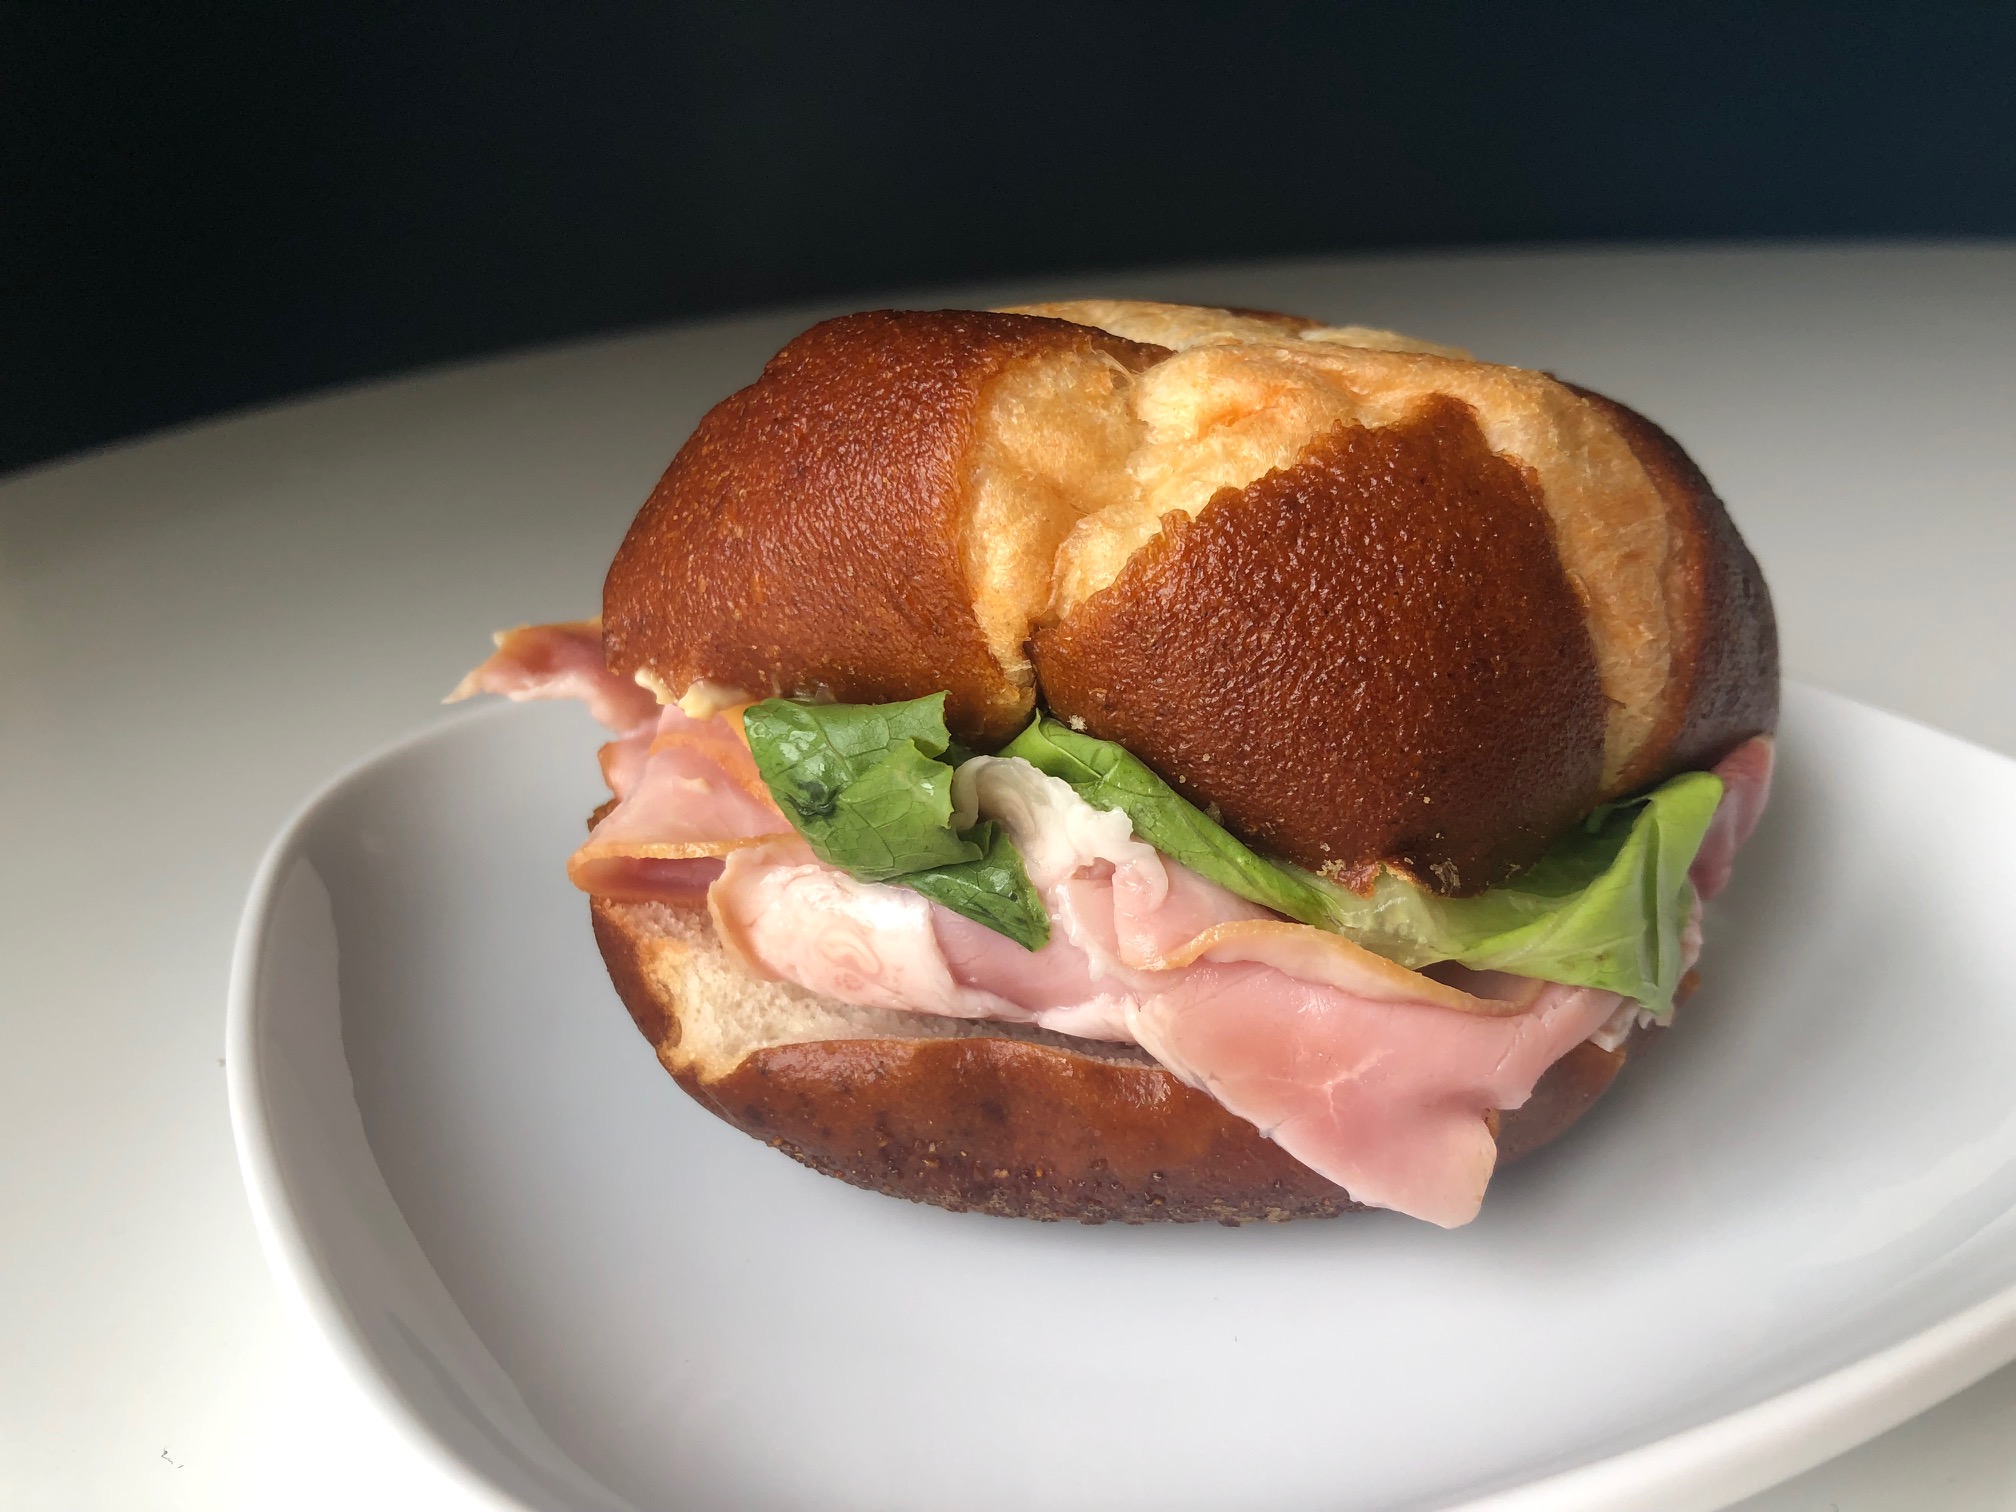 On a small white plate, there is a ham sandwich on a pretzel roll. Photo by Alyssa Buckley.